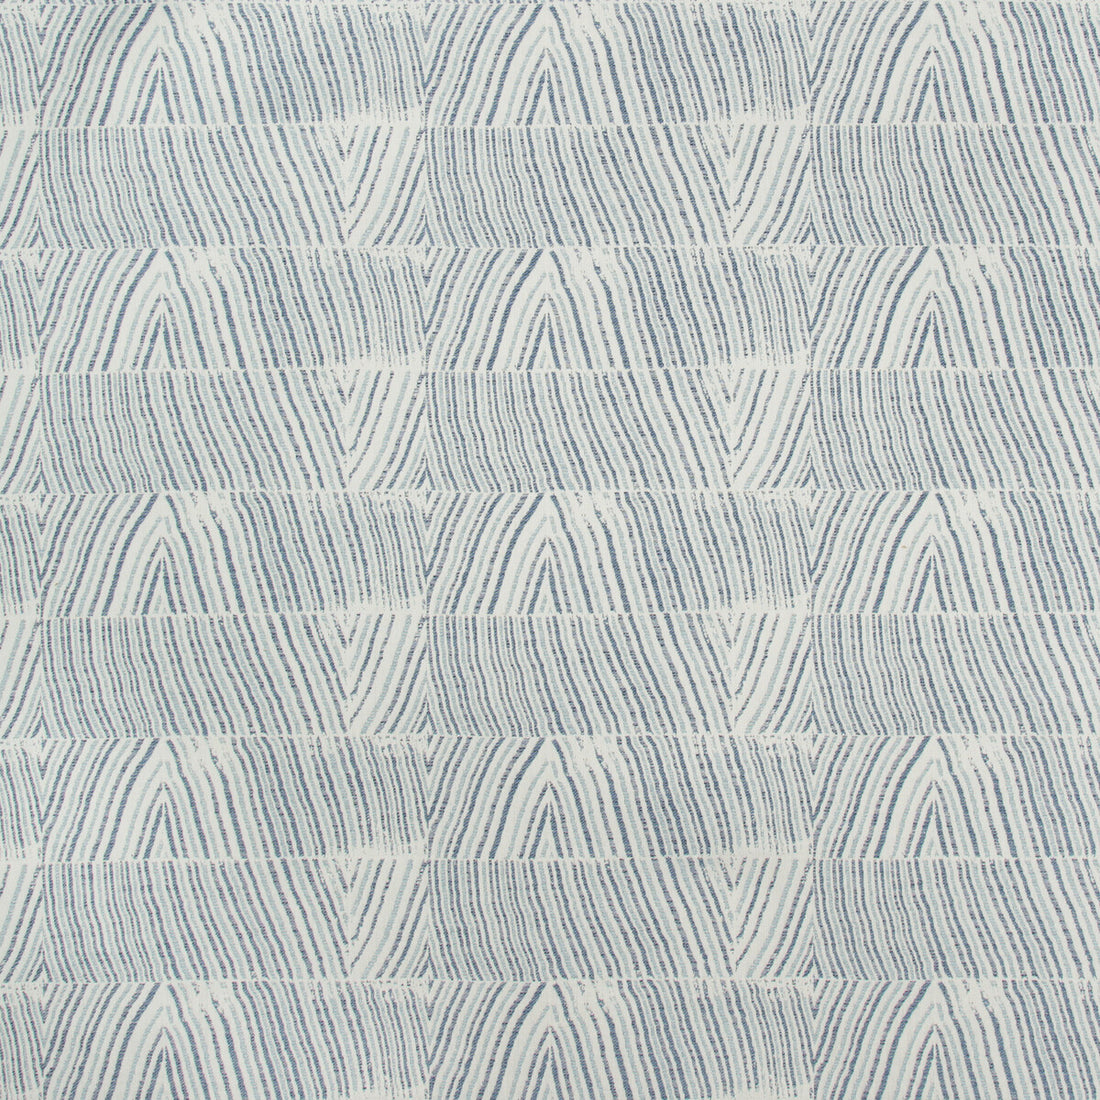 Post Weave fabric in lake color - pattern GWF-3738.15.0 - by Lee Jofa Modern in the Kw Terra Firma II Indoor Outdoor collection